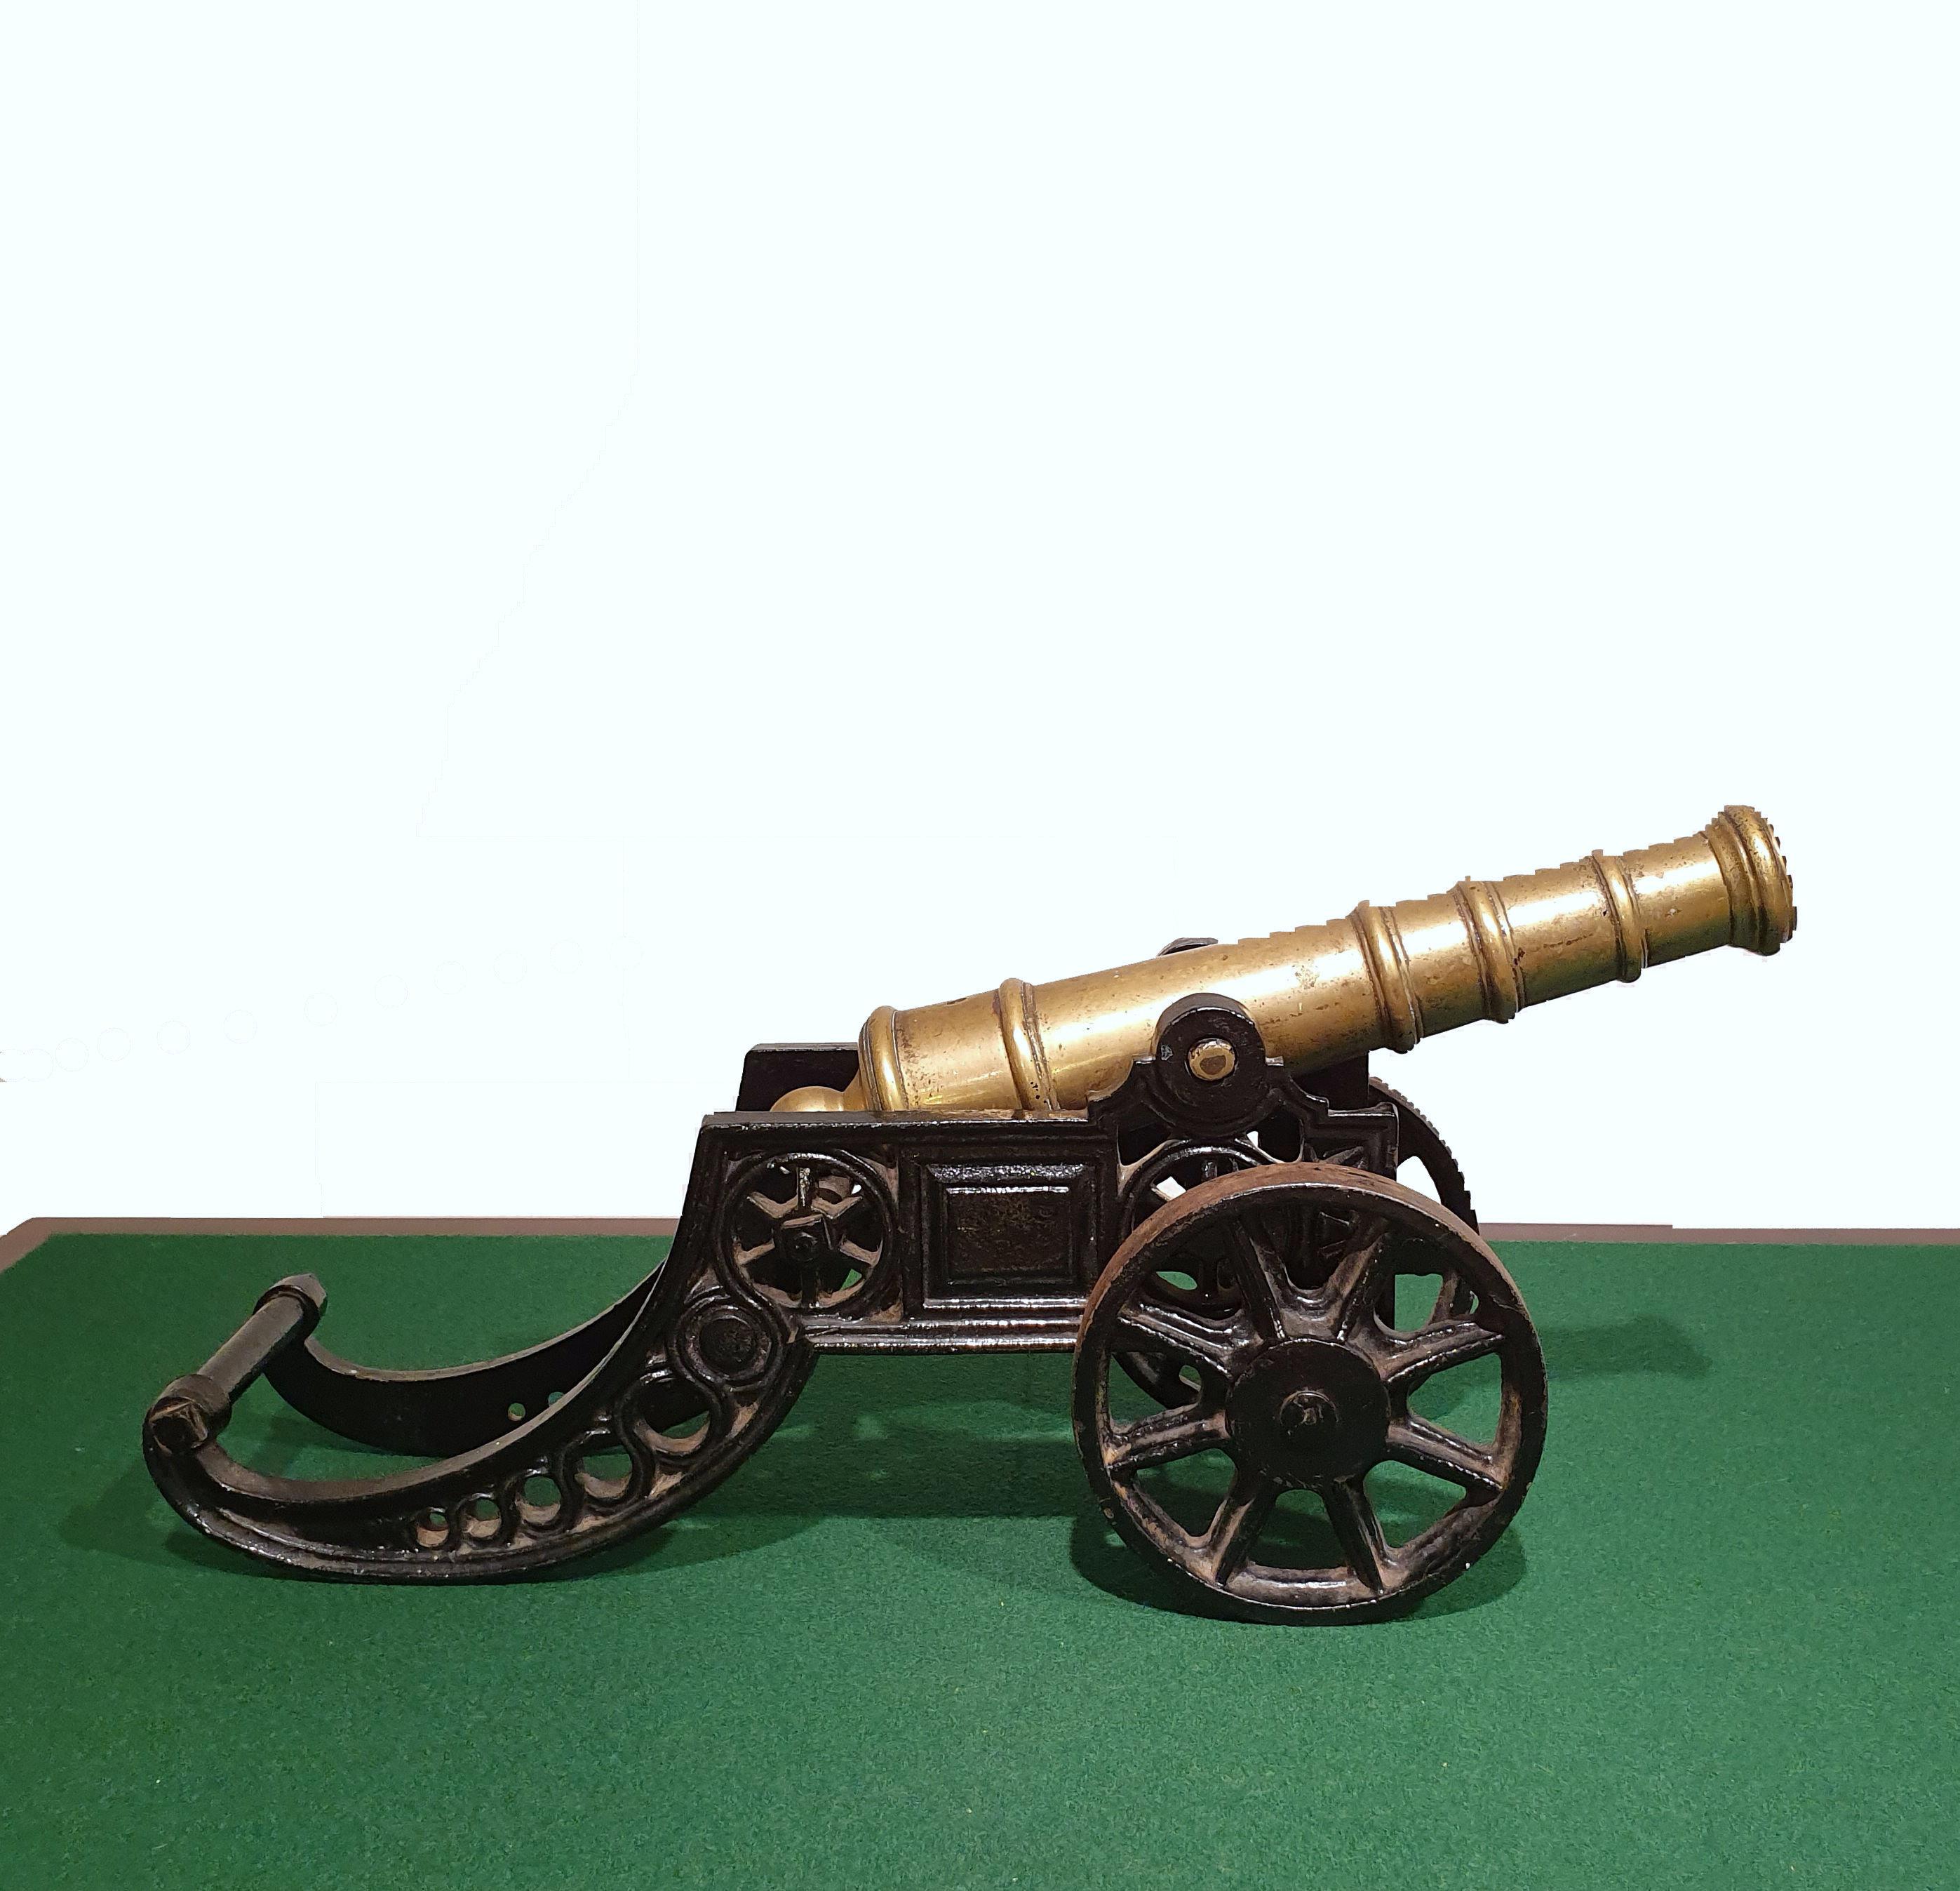 This well-proportioned to scale and detailed cast iron model of an English starting cannon features movable parts including the wheels and cannon barrel. It includes excellent detailing work, and a lovely worn patina, to commensurate with age. It